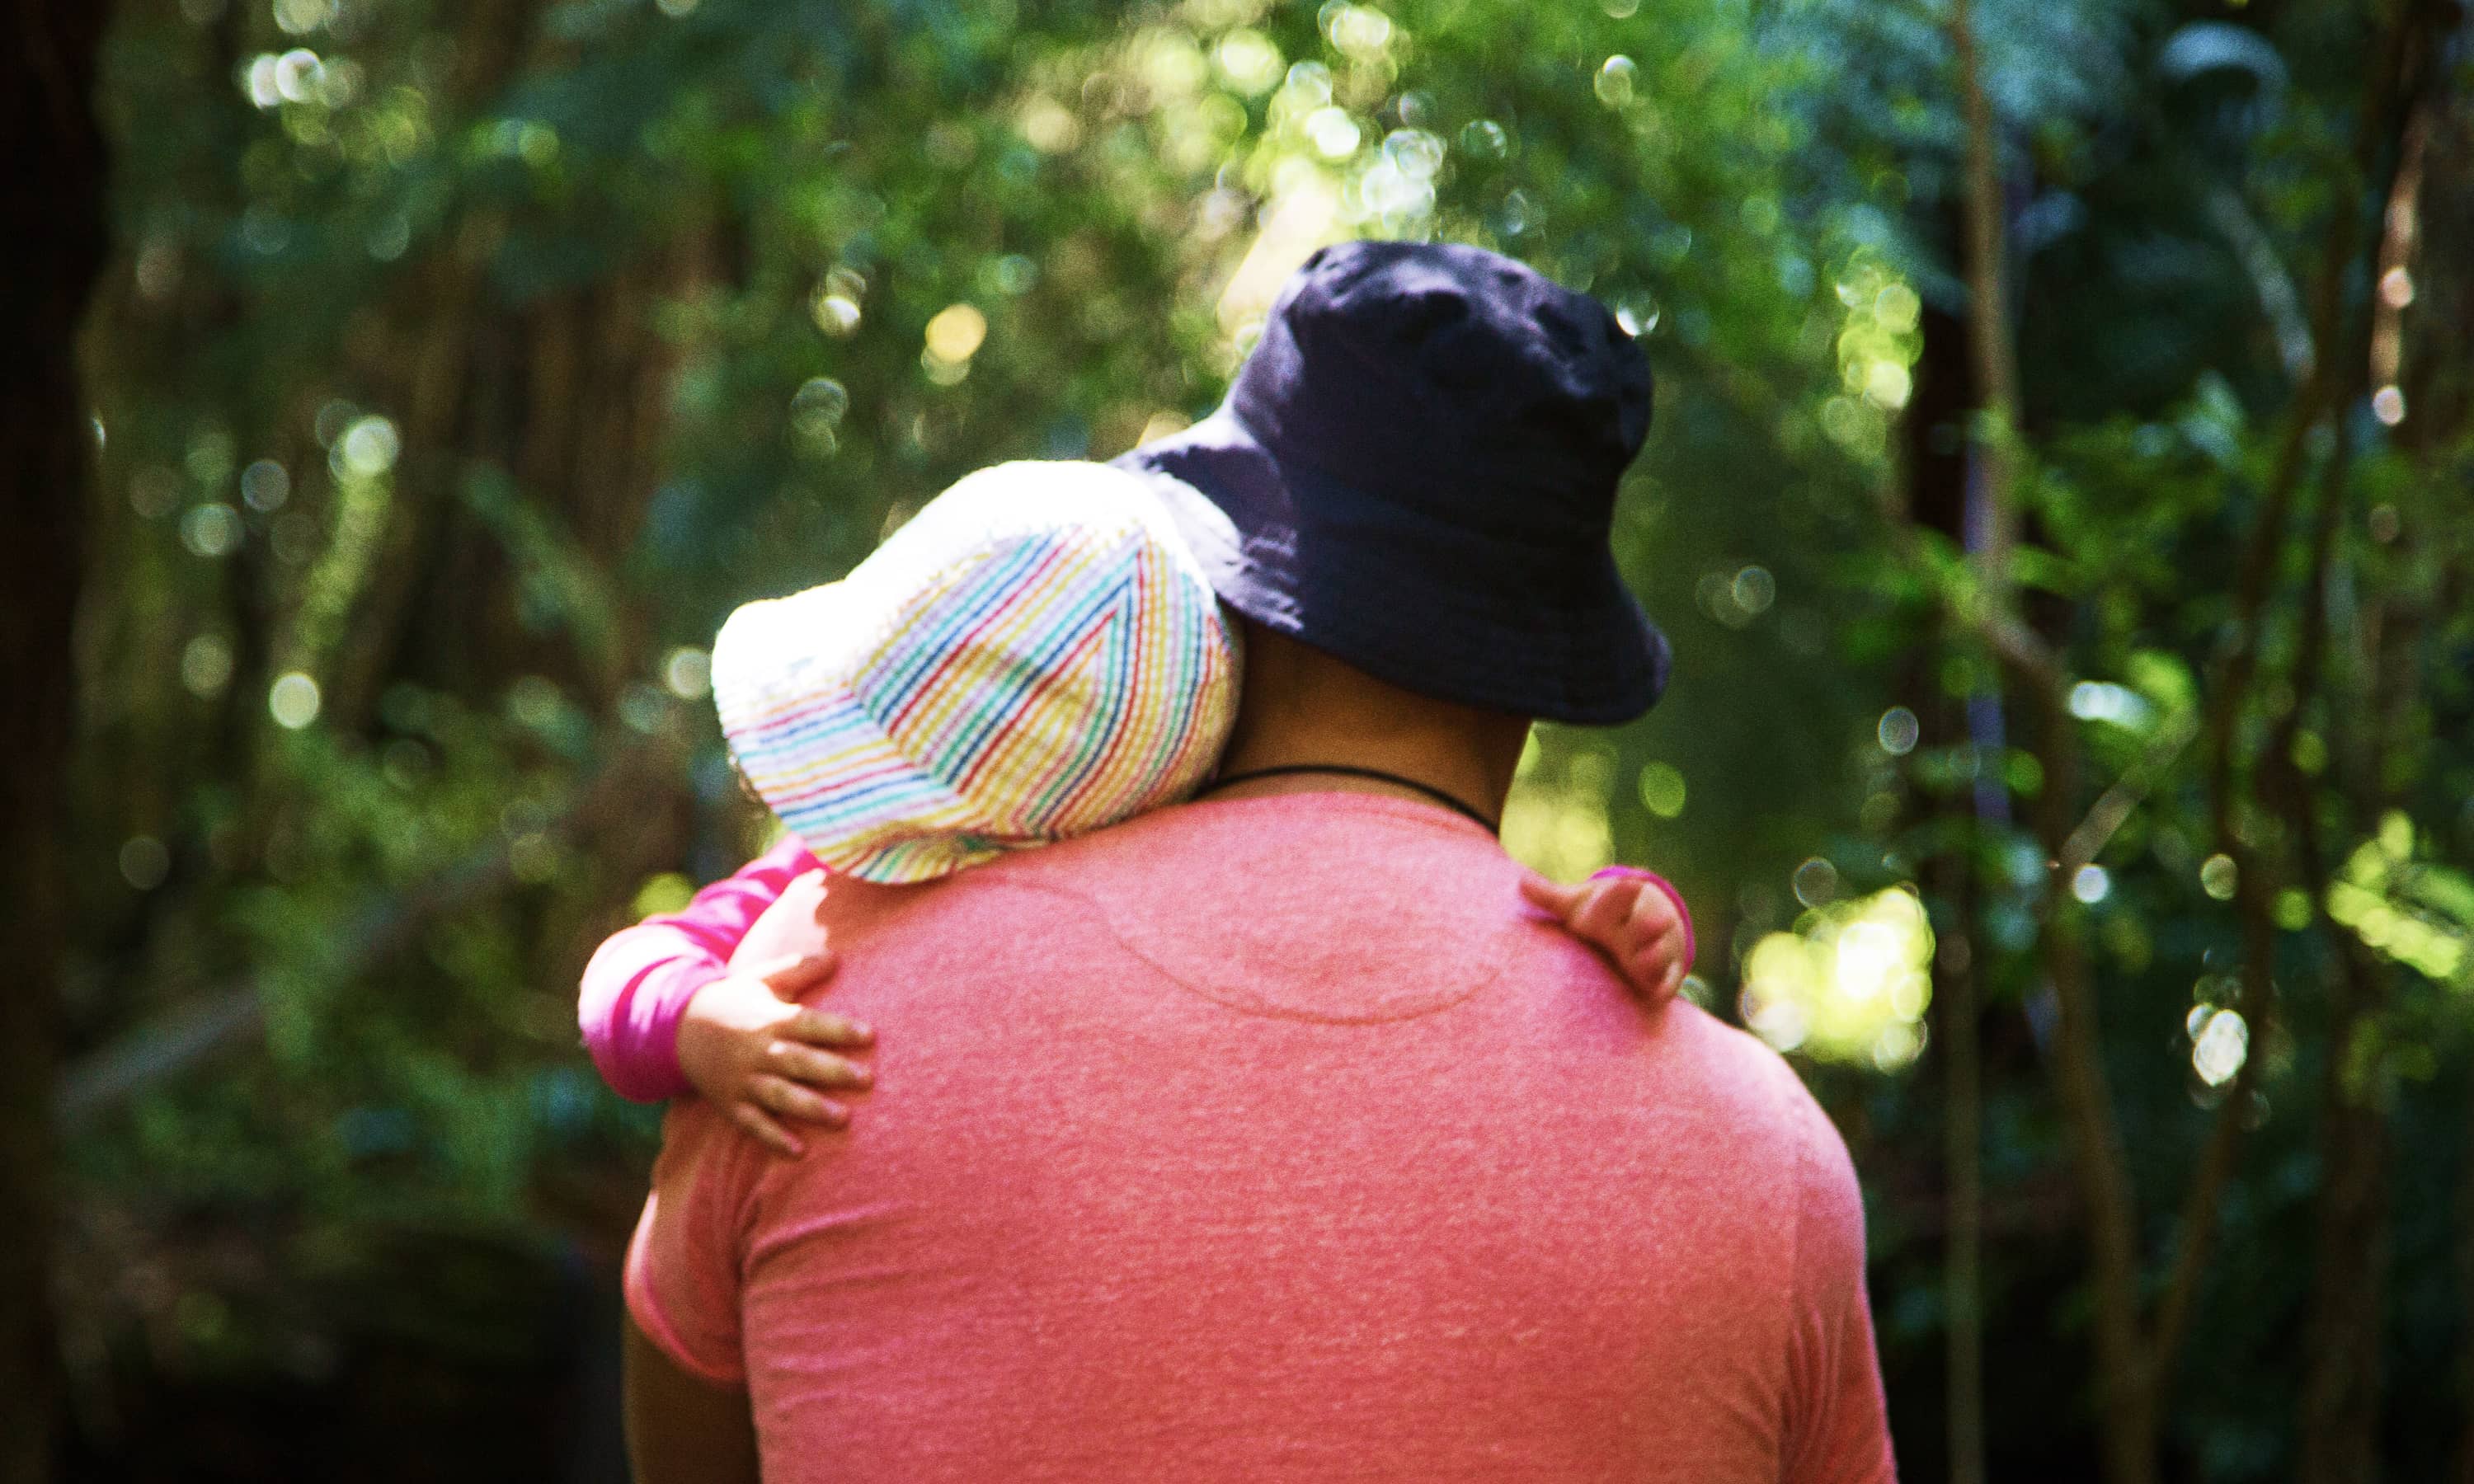 A man shown carrying a toddler in the park from behind 